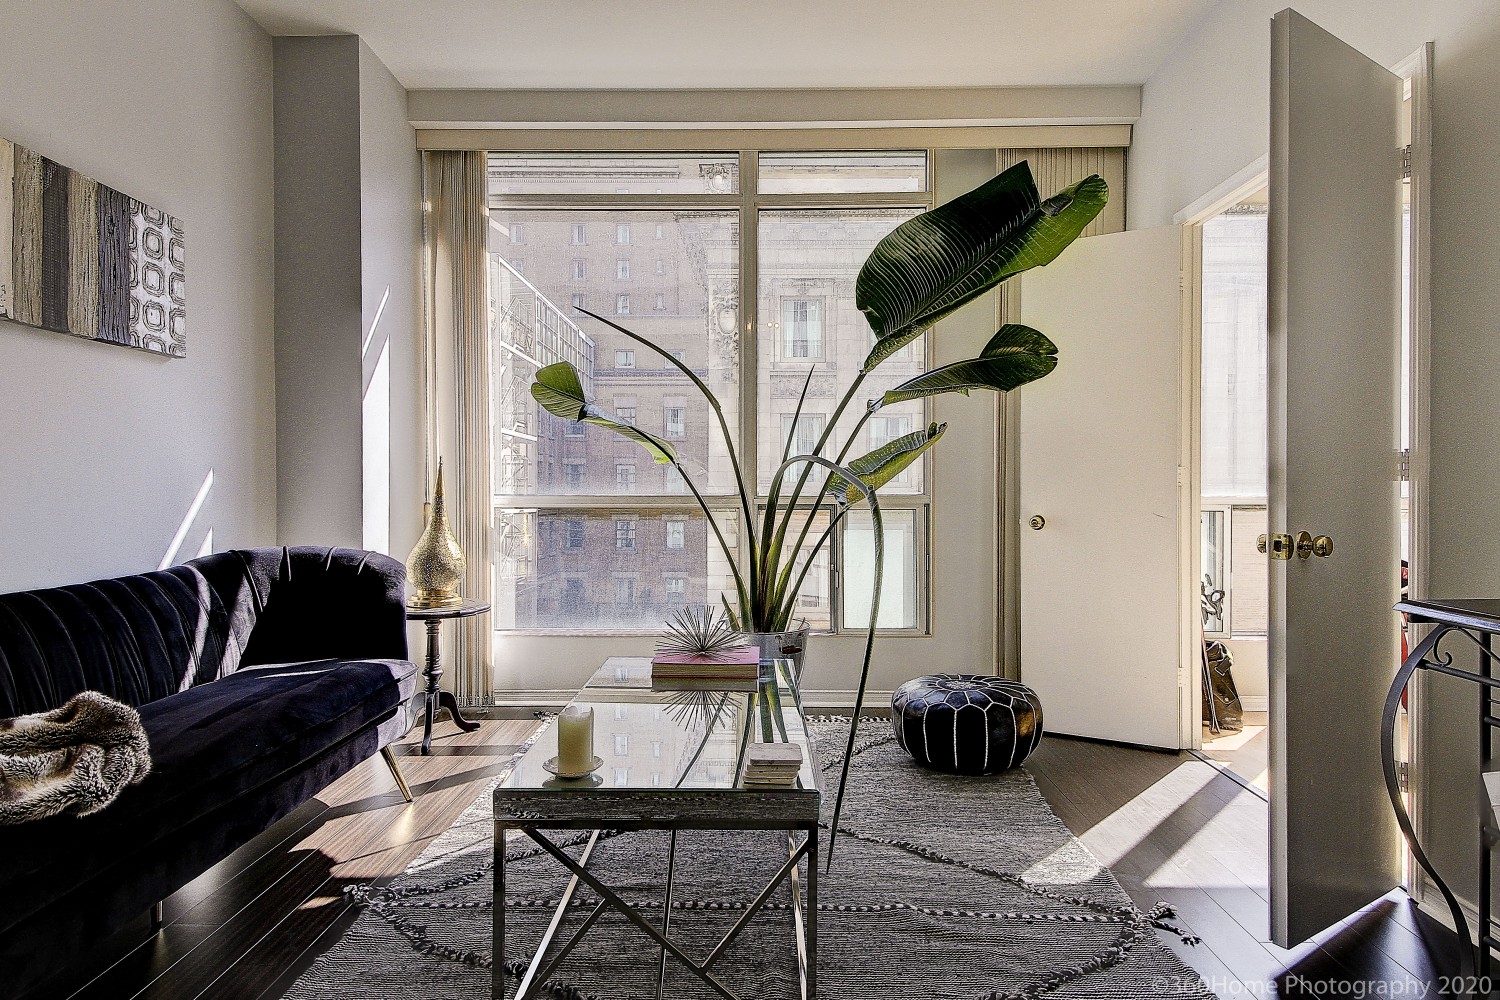 Condo living room with blue sofa, glass table, fancy vase and large potted plant.